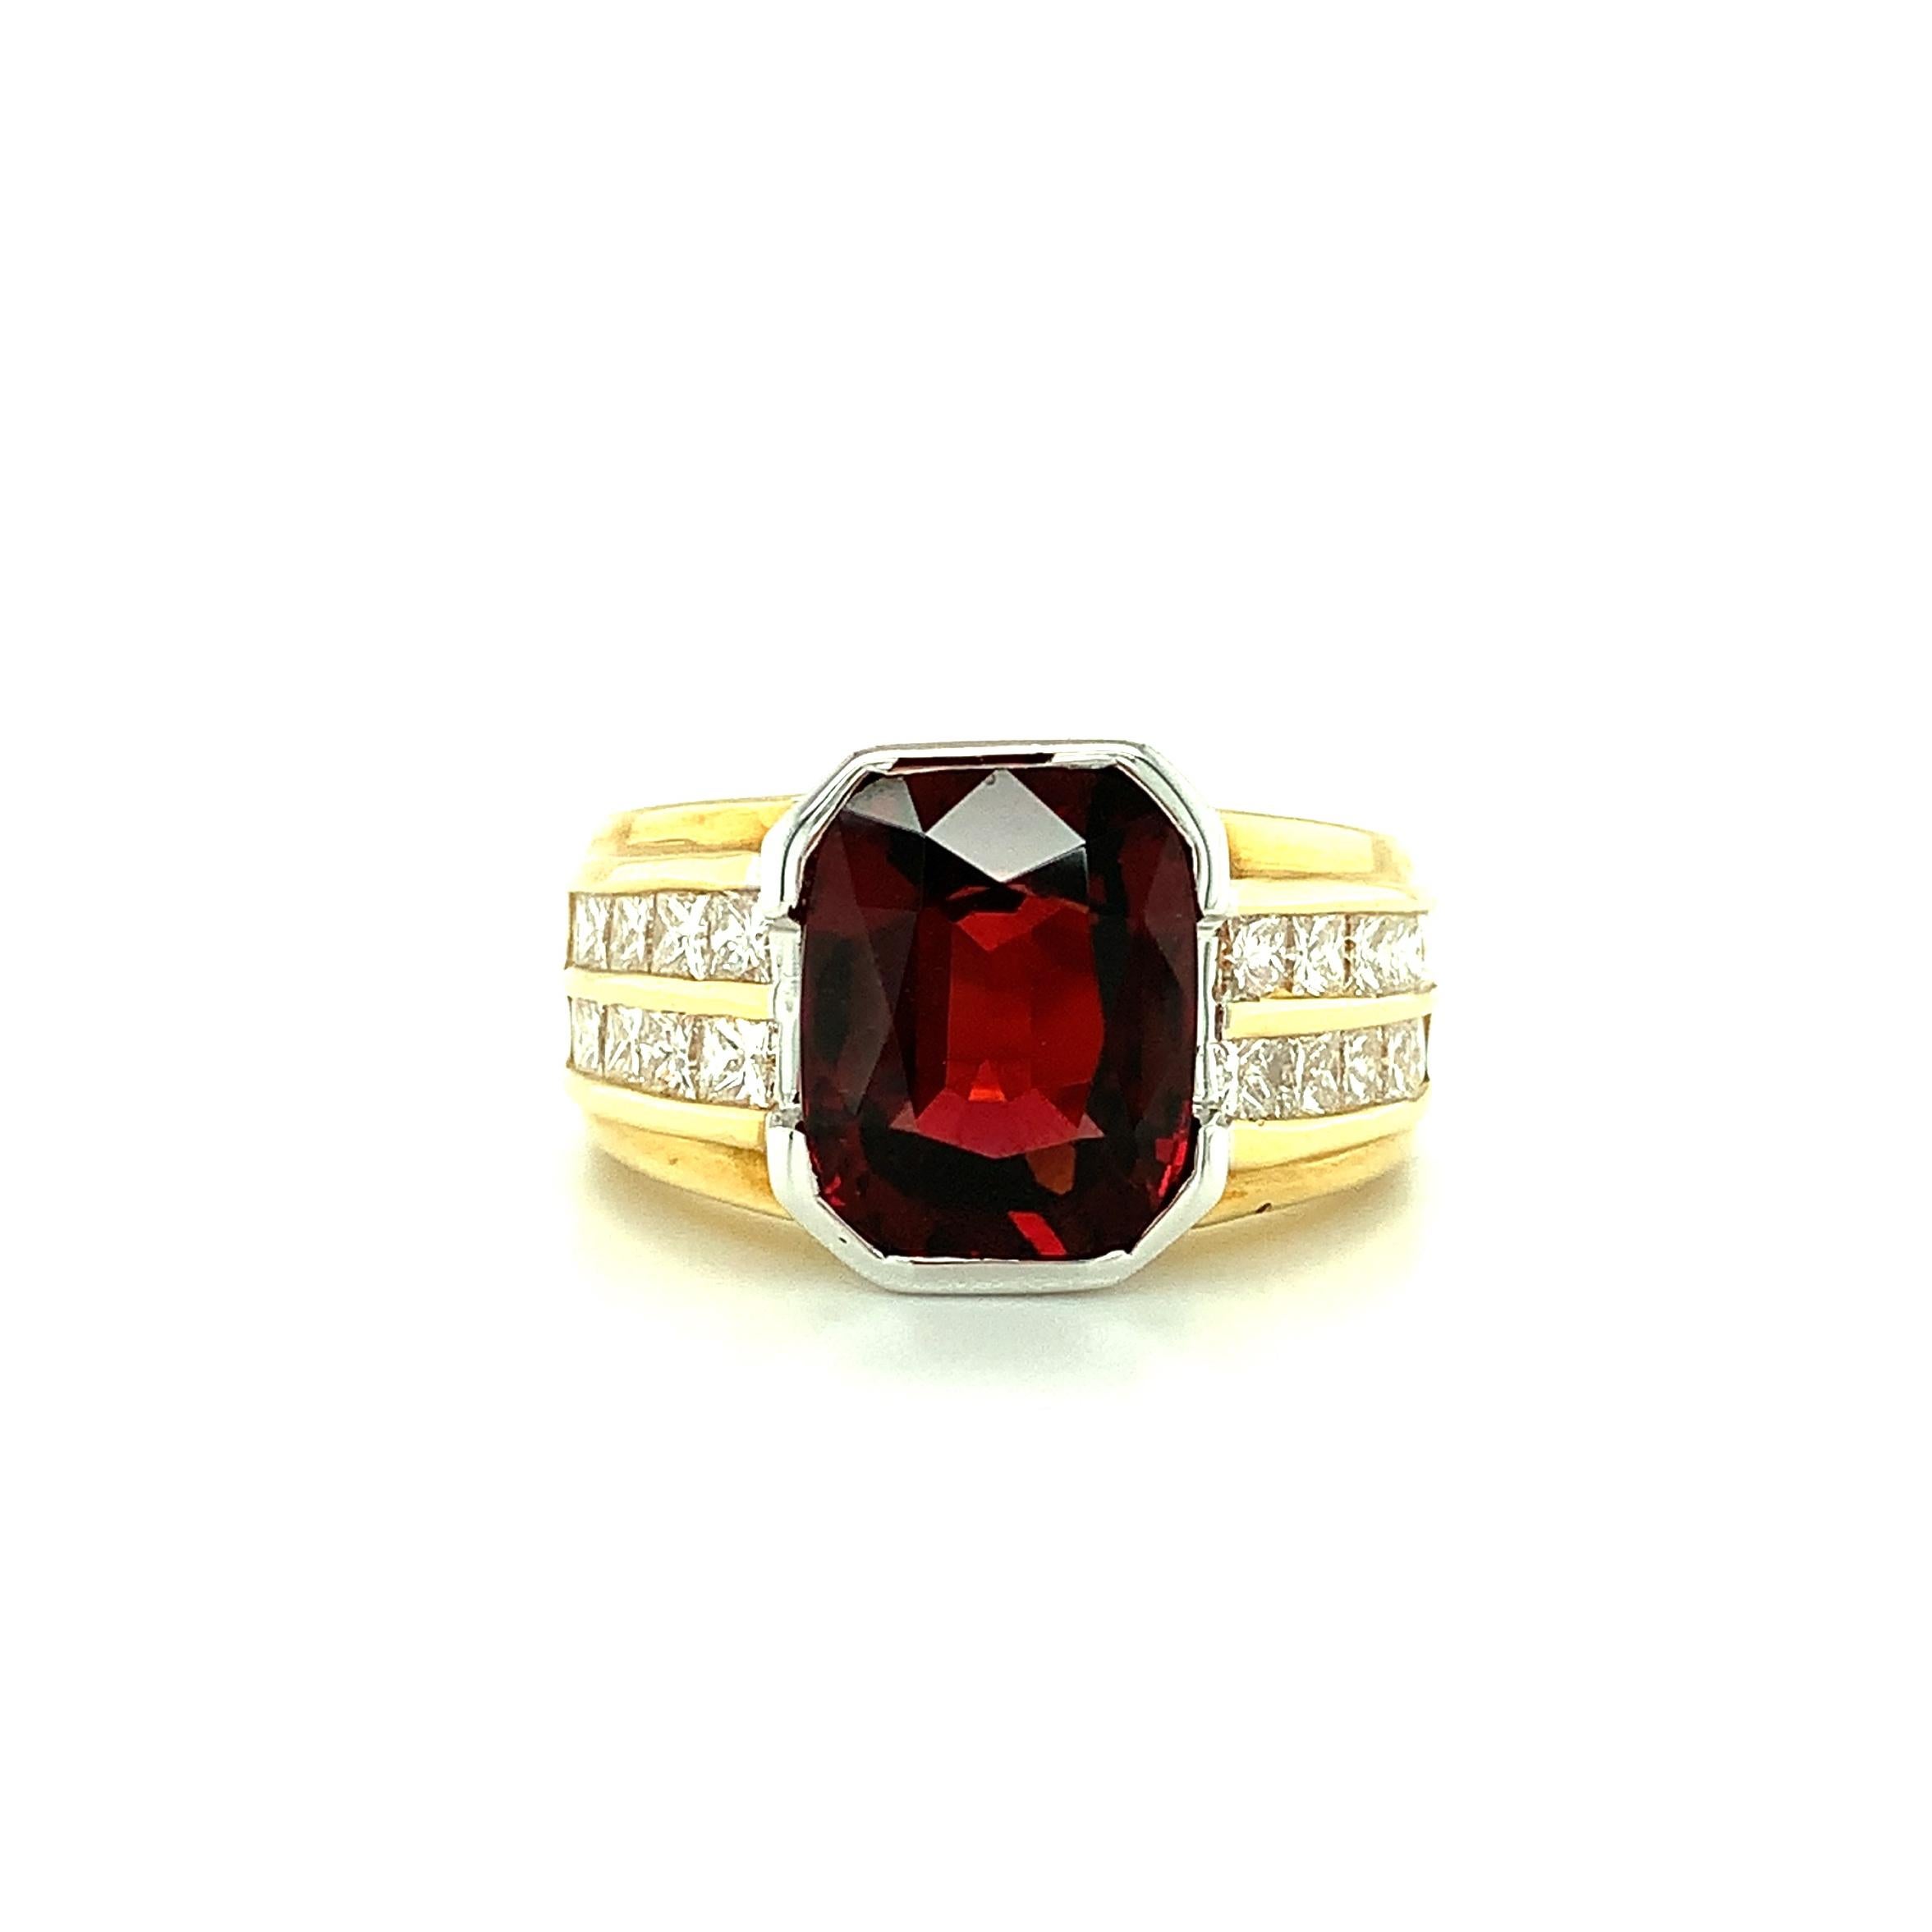 This bold band ring features a gorgeous 5.56 carat emerald-cut, bright red garnet and over a carat of diamonds! The center gem has such rich color and is beautifully faceted and proportioned. It is mounted in a striking 18k white gold half-bezel